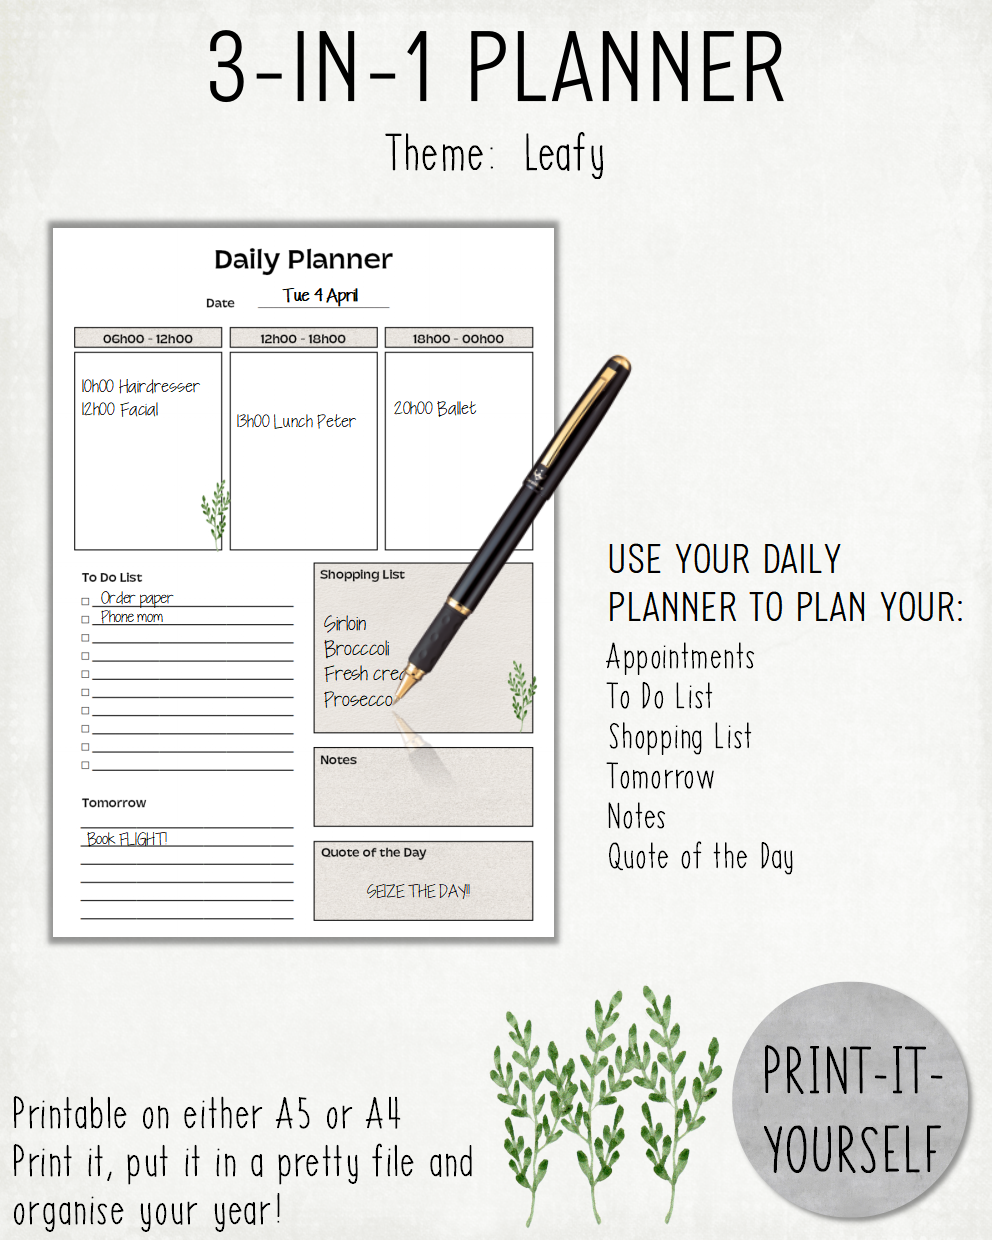 READY TO PRINT:  3-in-1 Planner - Leafy